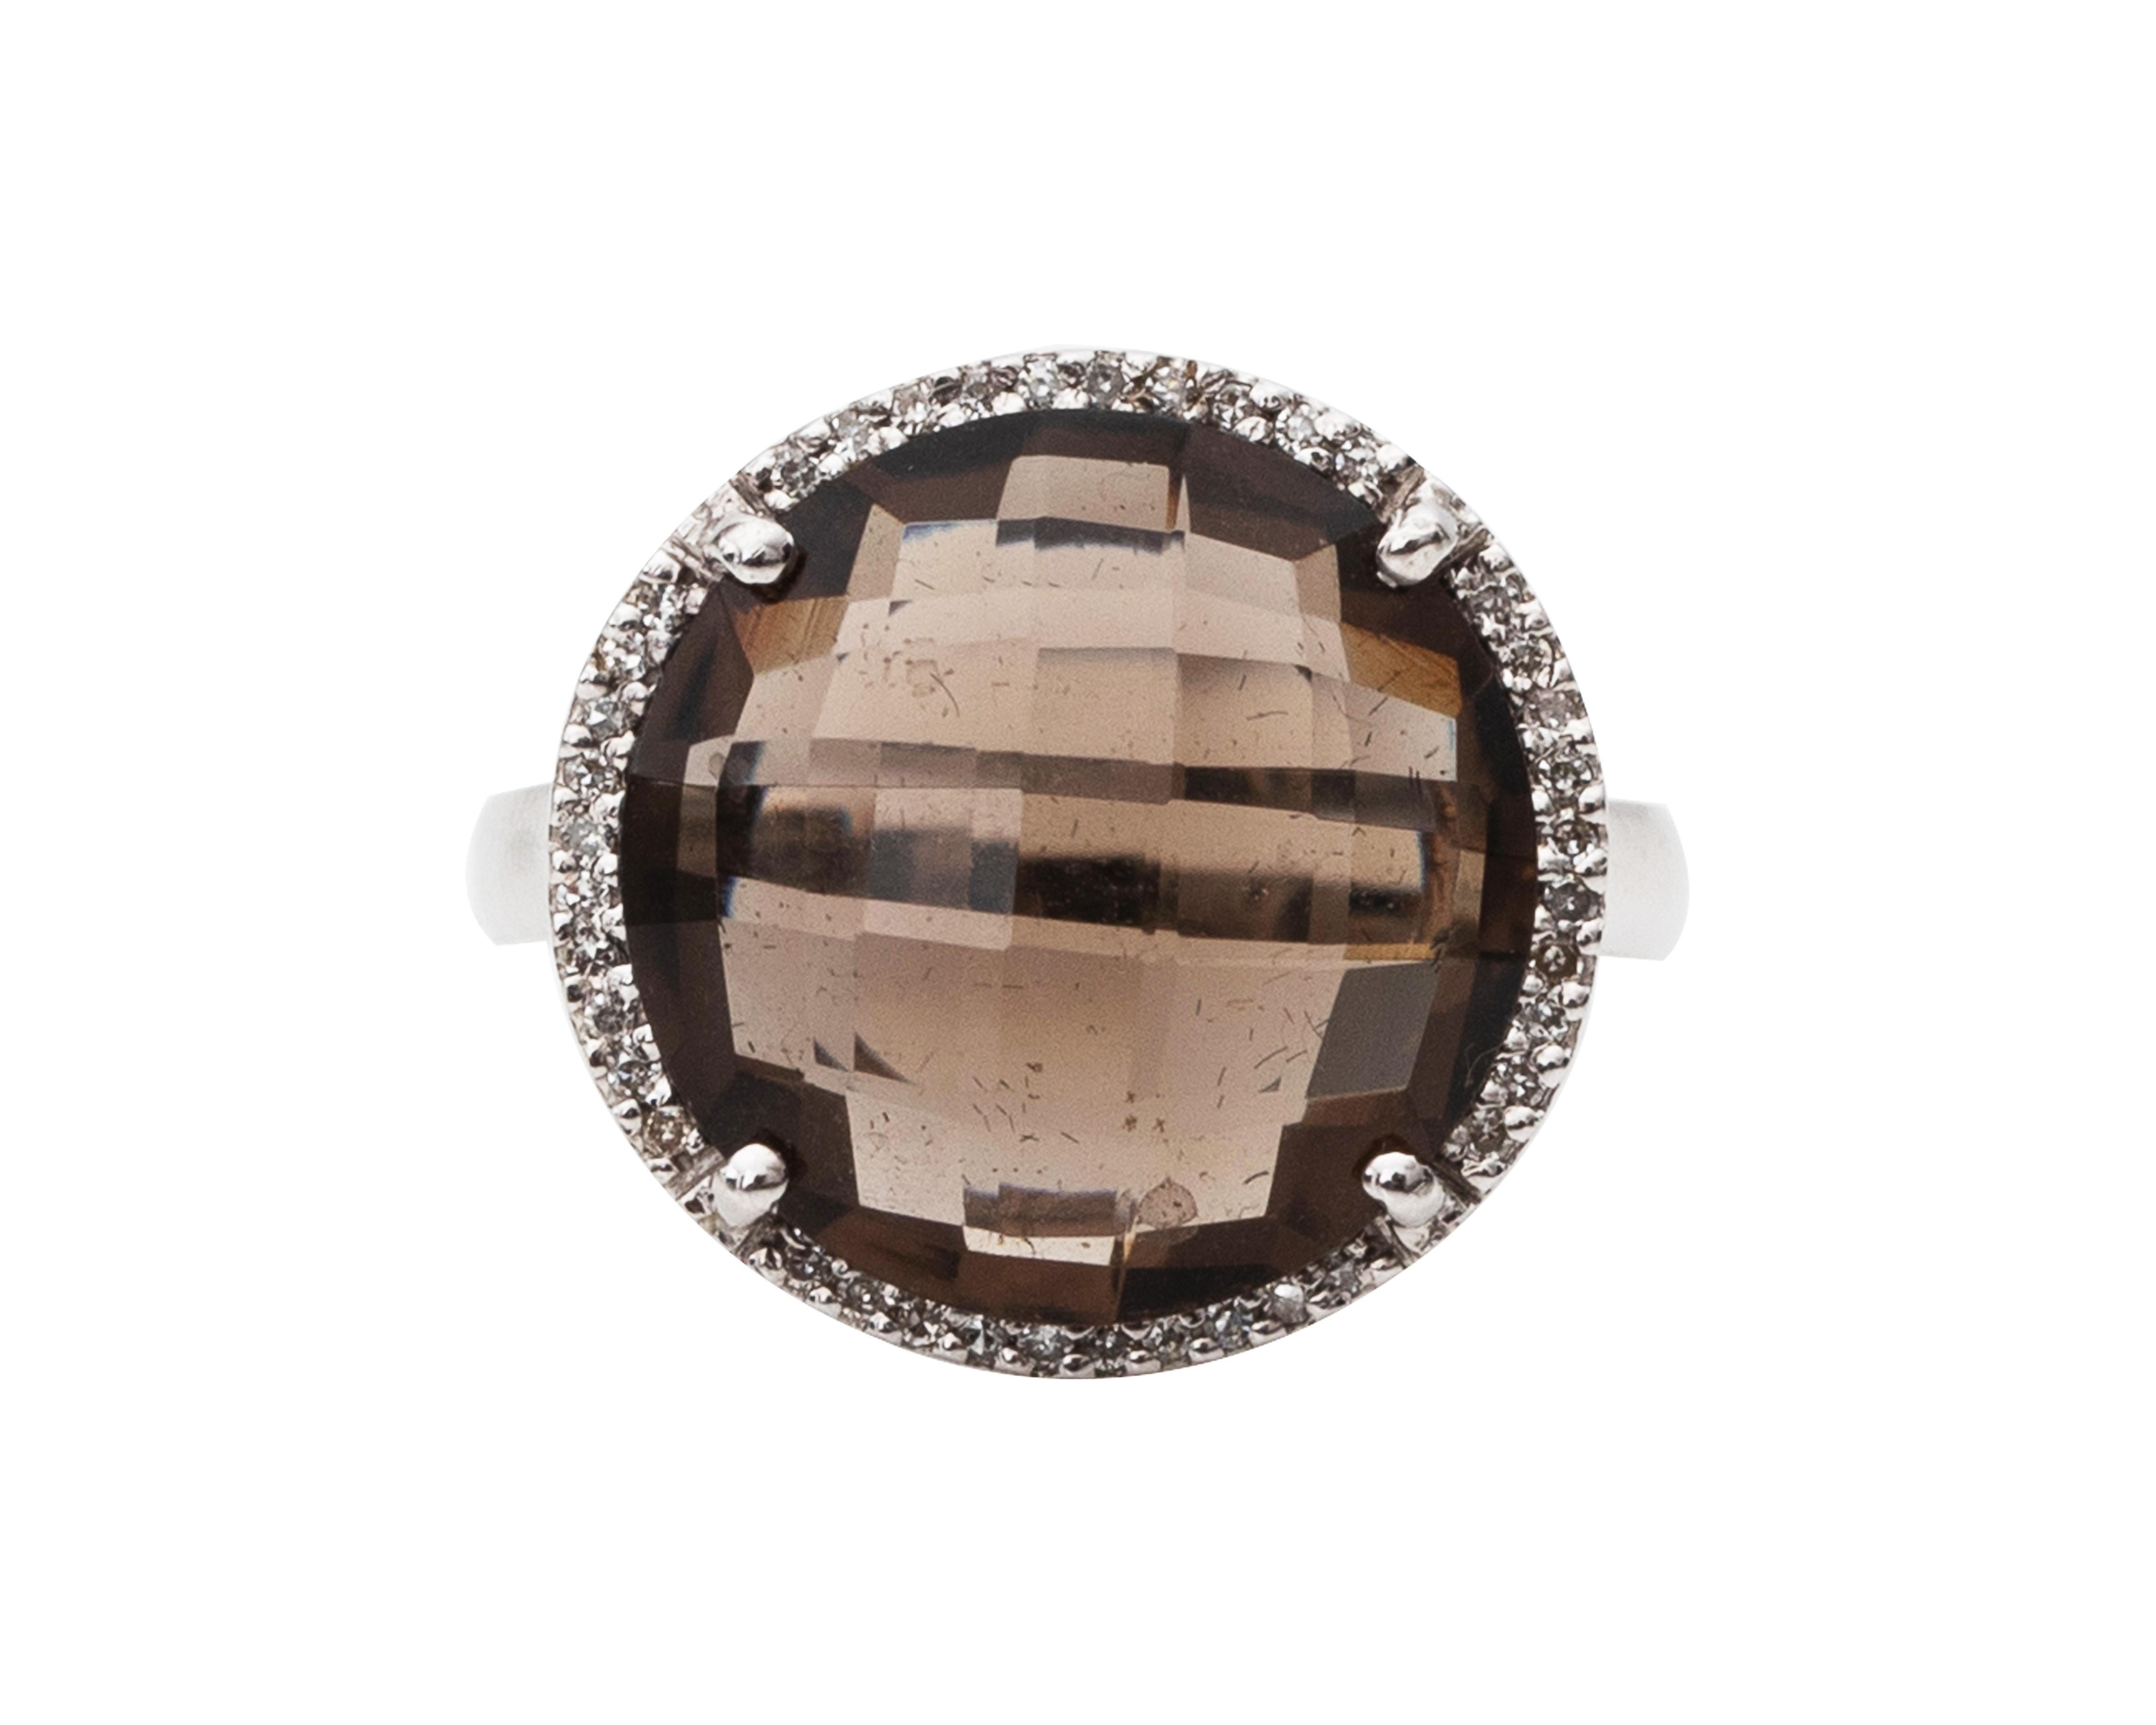 Item Details:
Metal type: 14 Karat White Gold
Weight: 5.8 grams
Size: 6 (resizable)

Smokey Quartz Details:
Cut: Fantasy Cut
Carat 4 Carats 

Gorgeous, yet simple ornate larger ring from the 1980s. It features a beautiful 4 Carat Smokey Quartz in